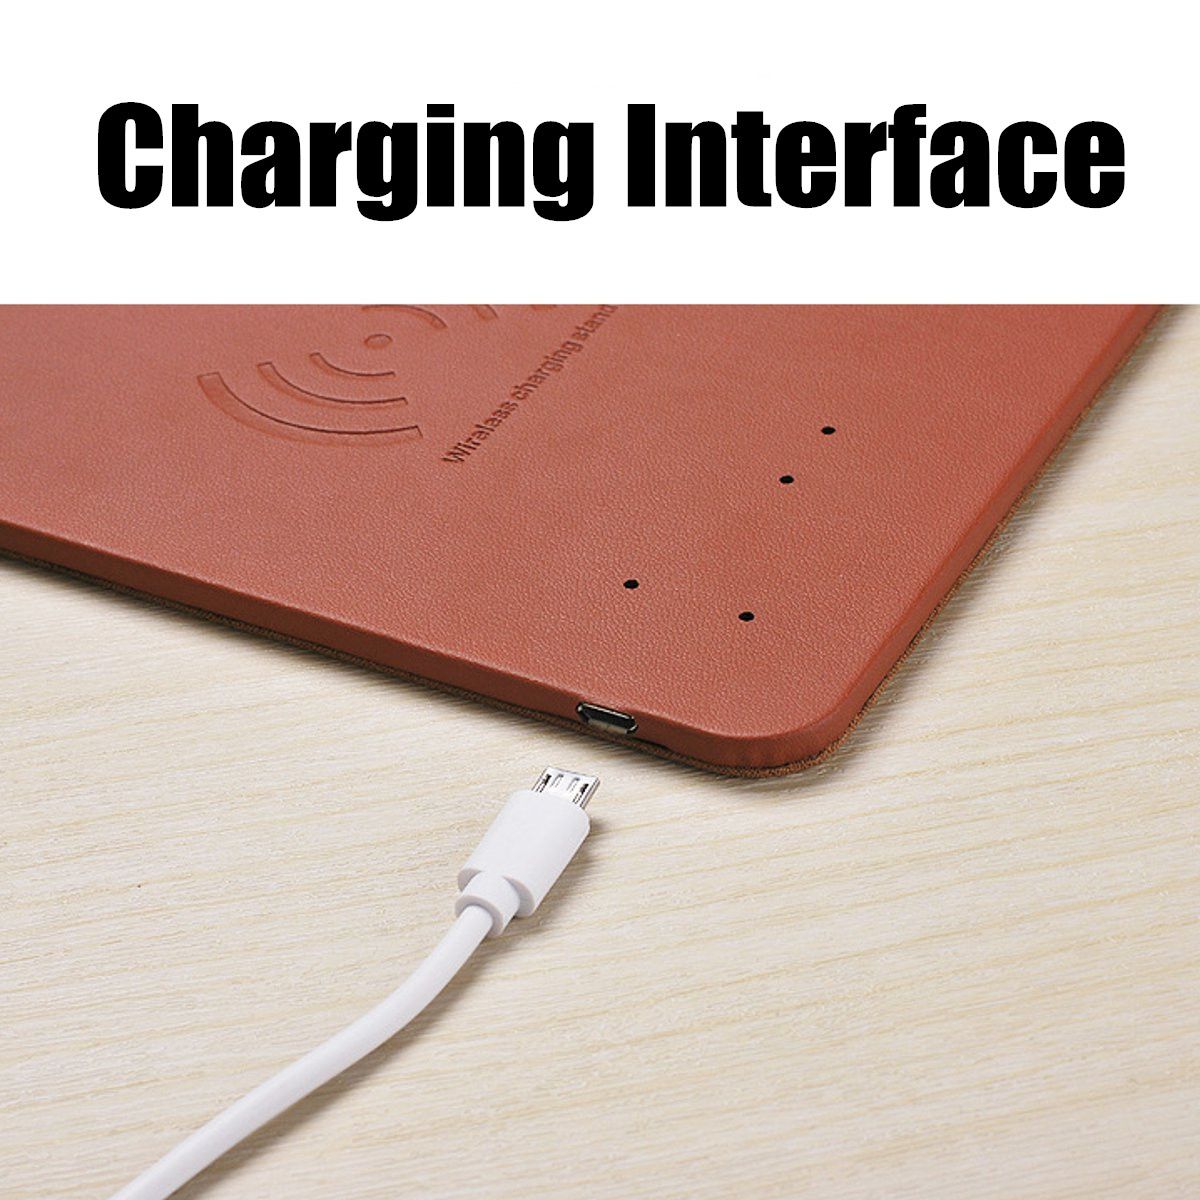 Imitation-Leather-Mobile-Phones-Wireless-Fast-Charger-Mouse-Pad-Qi-Wireless-Charging-1316737